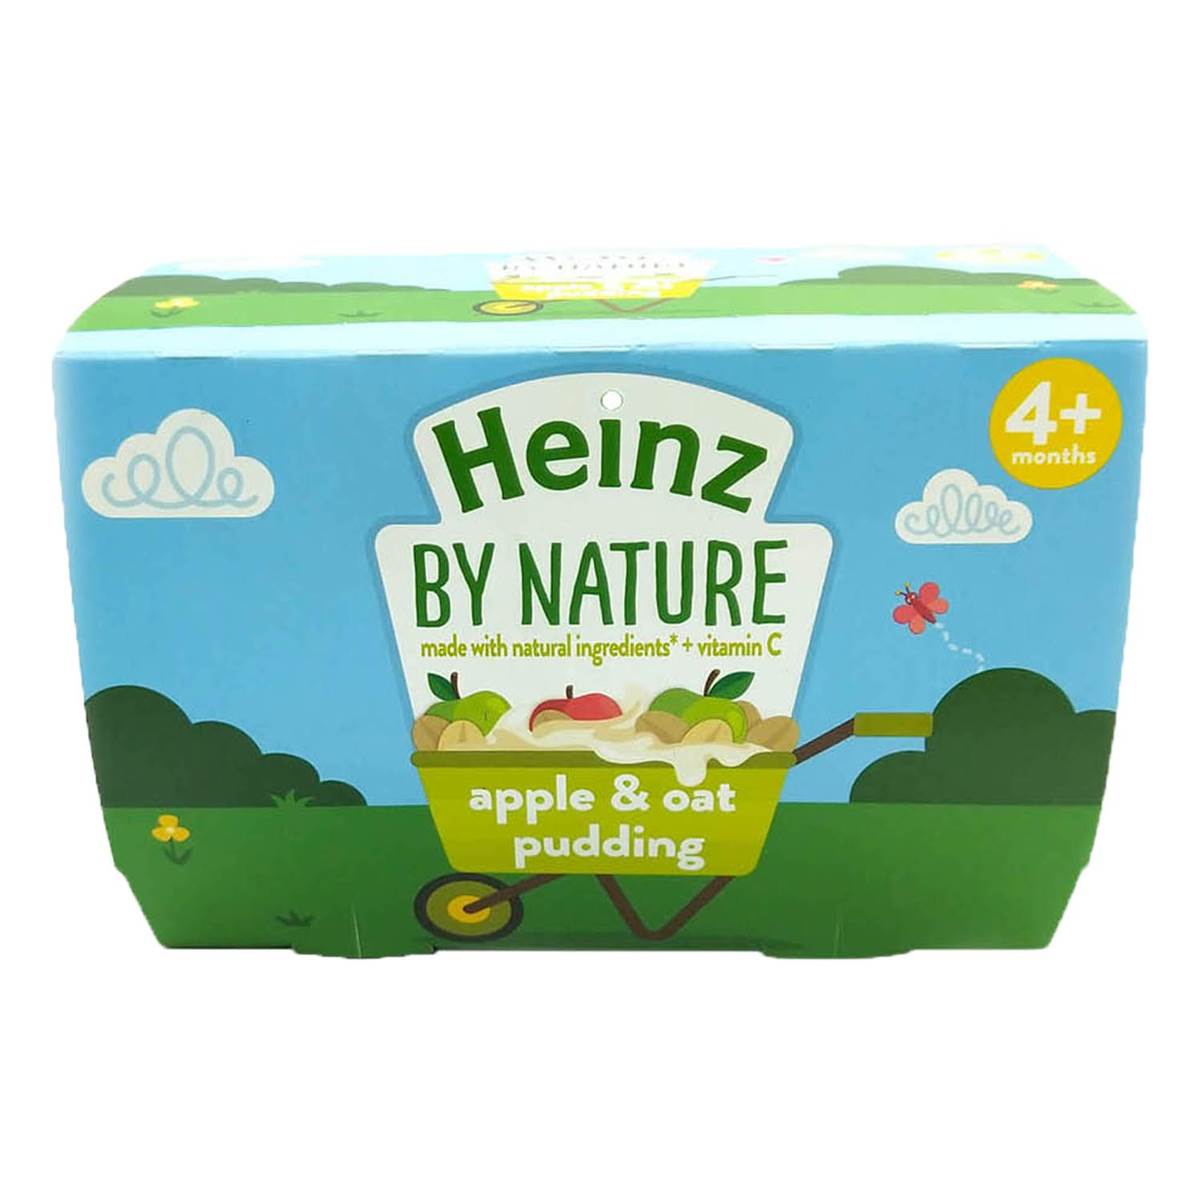 Heinz by Nature Apple & Oat Pudding (Pack of 4) - 400g (4x100g)